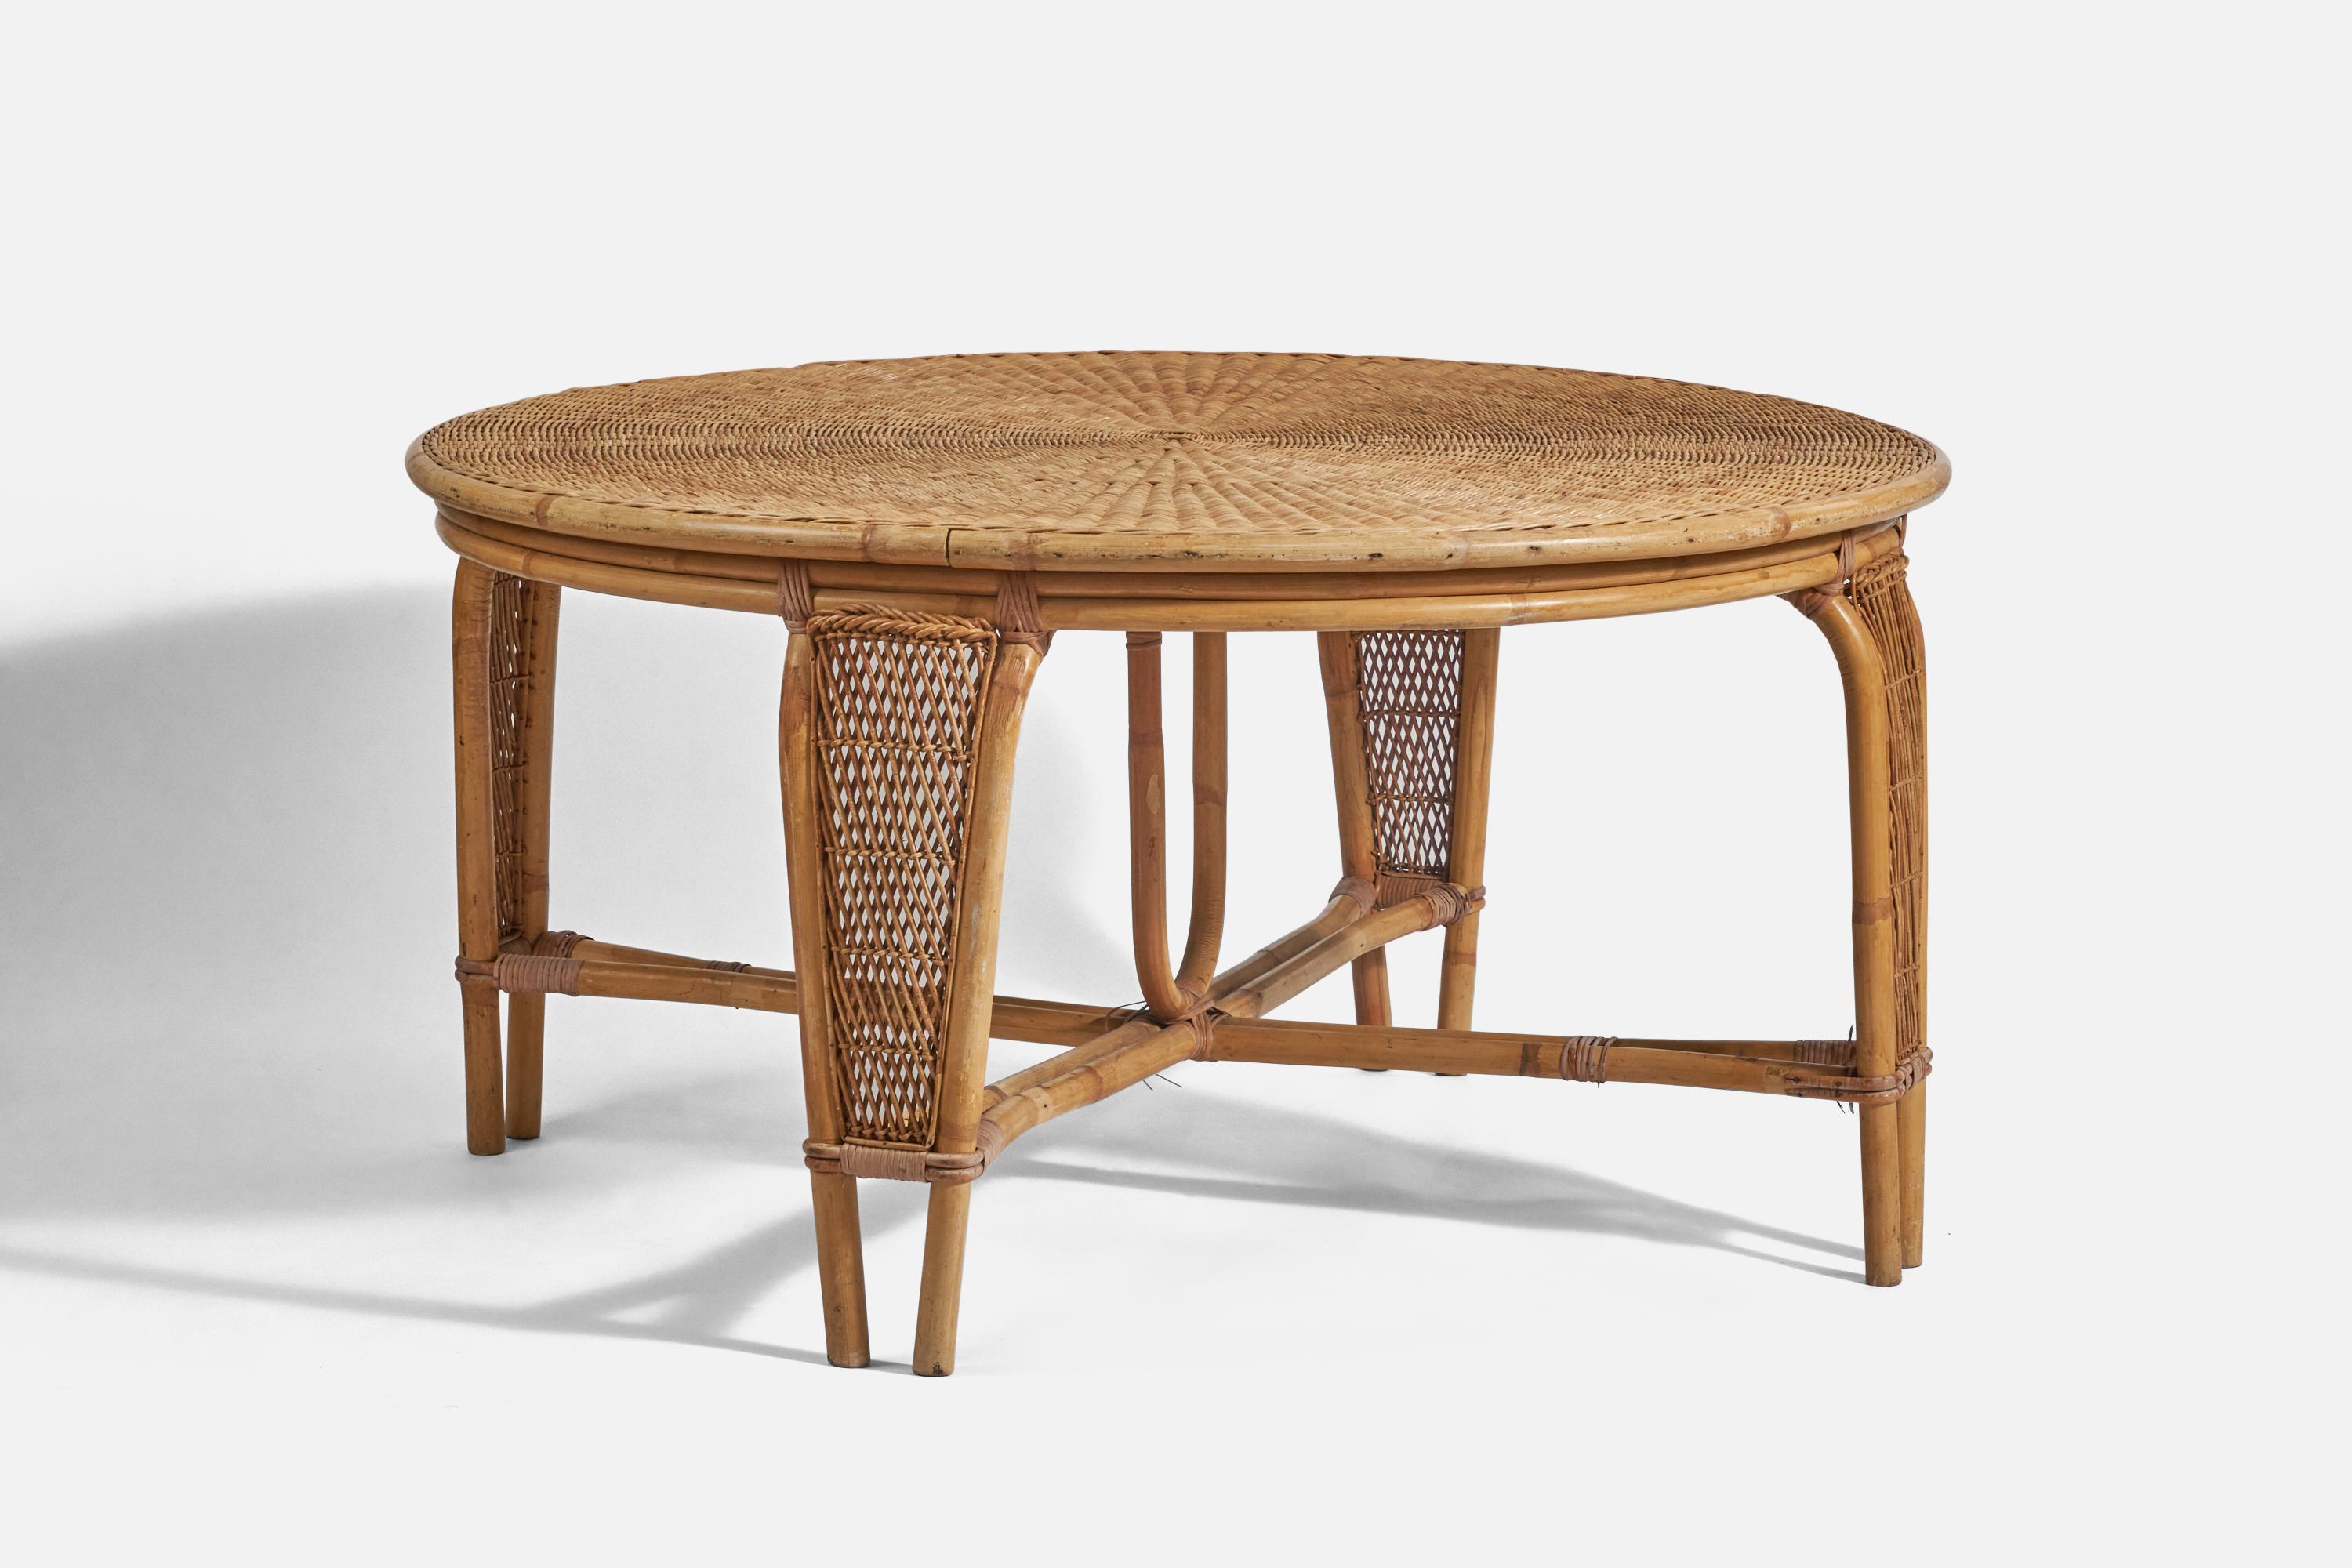 A bamboo and wicker games / dining or center table designed and produced by Calif-Asia, USA, c. 1970s.